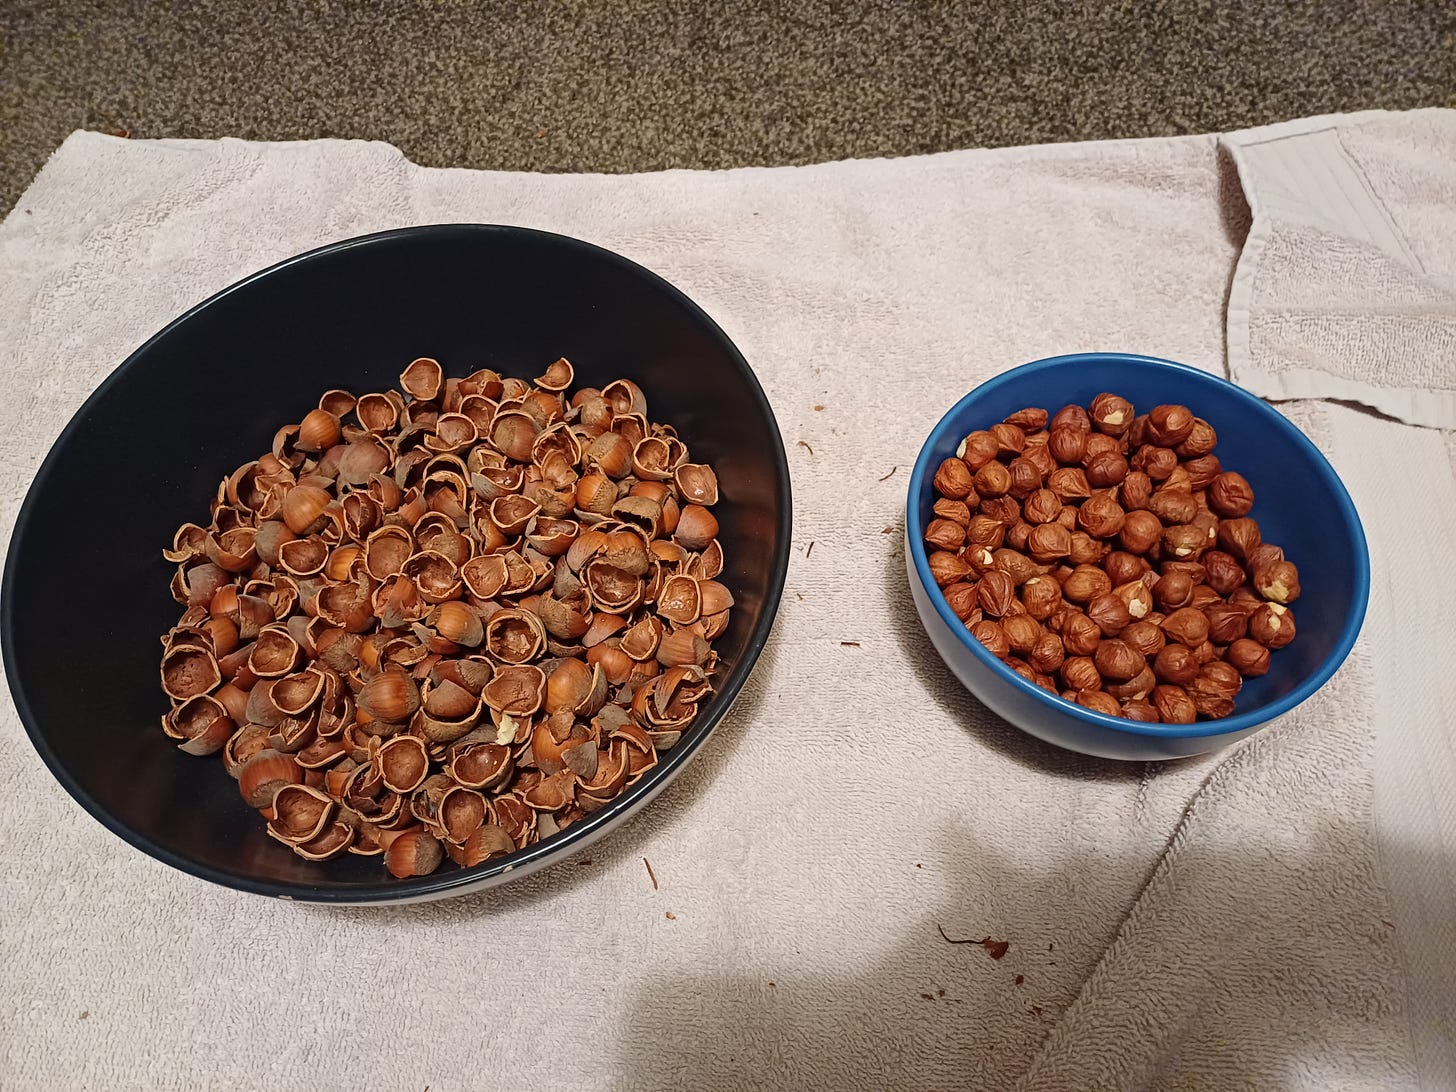 Hazelnut shells in a large dark bowl; hazelnuts in a smaller blue bowl; both sitting on a towel with shell fragments scattered over it.